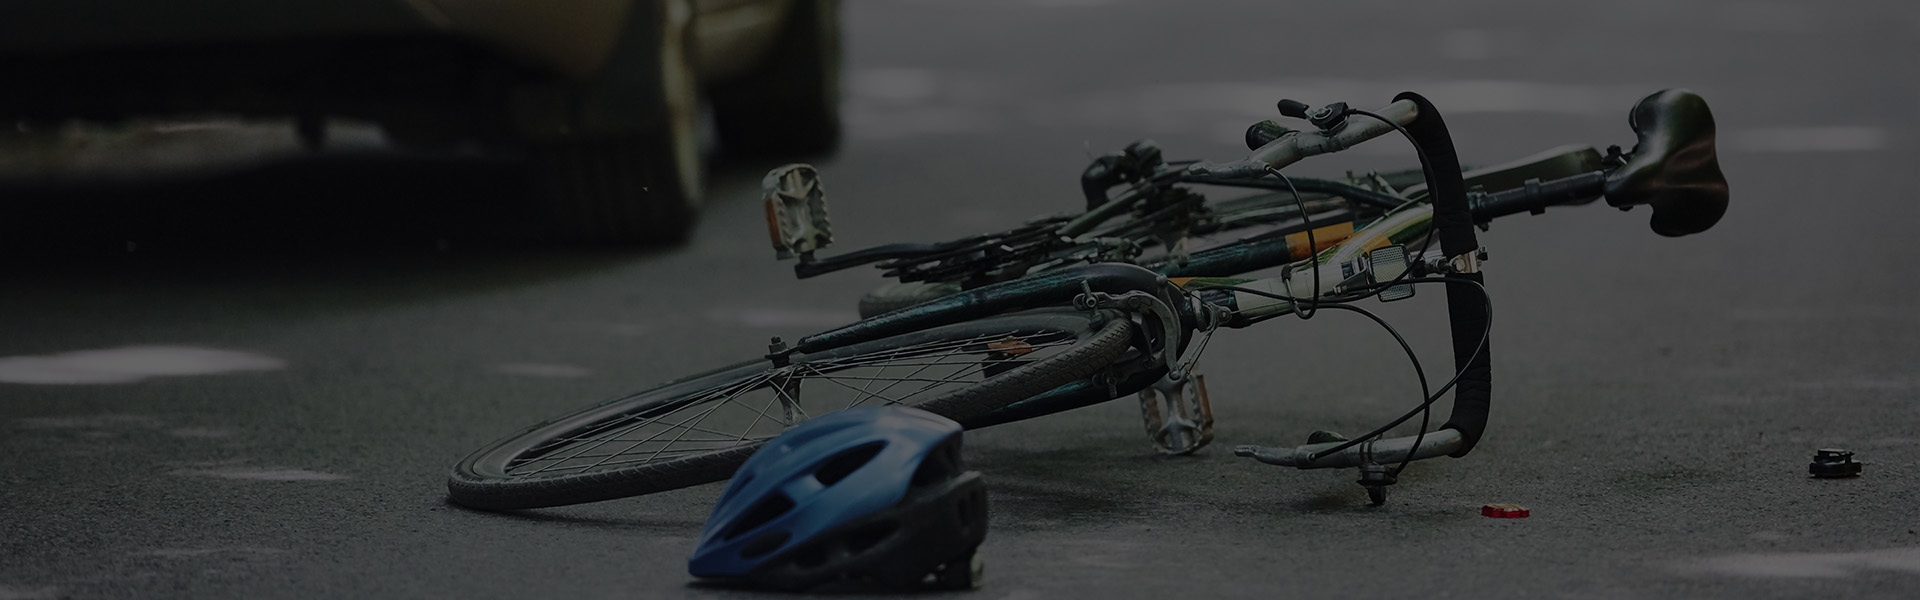 bicycle | Injury Law Partners - Personal Injury Lawyers